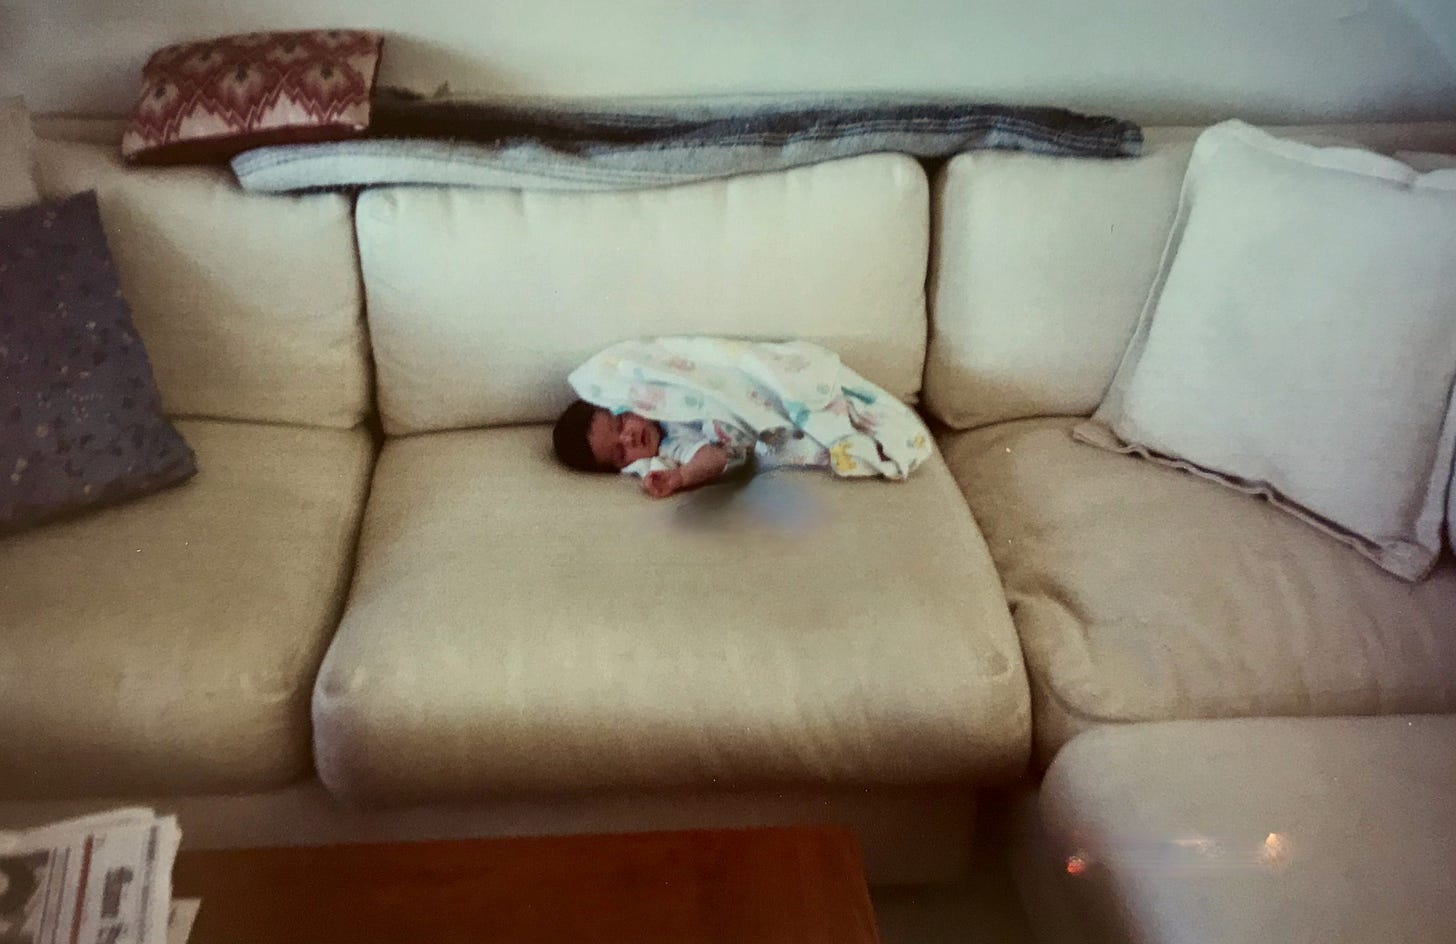 Infant with black hair wrapped in blanket on a huge beige sofa